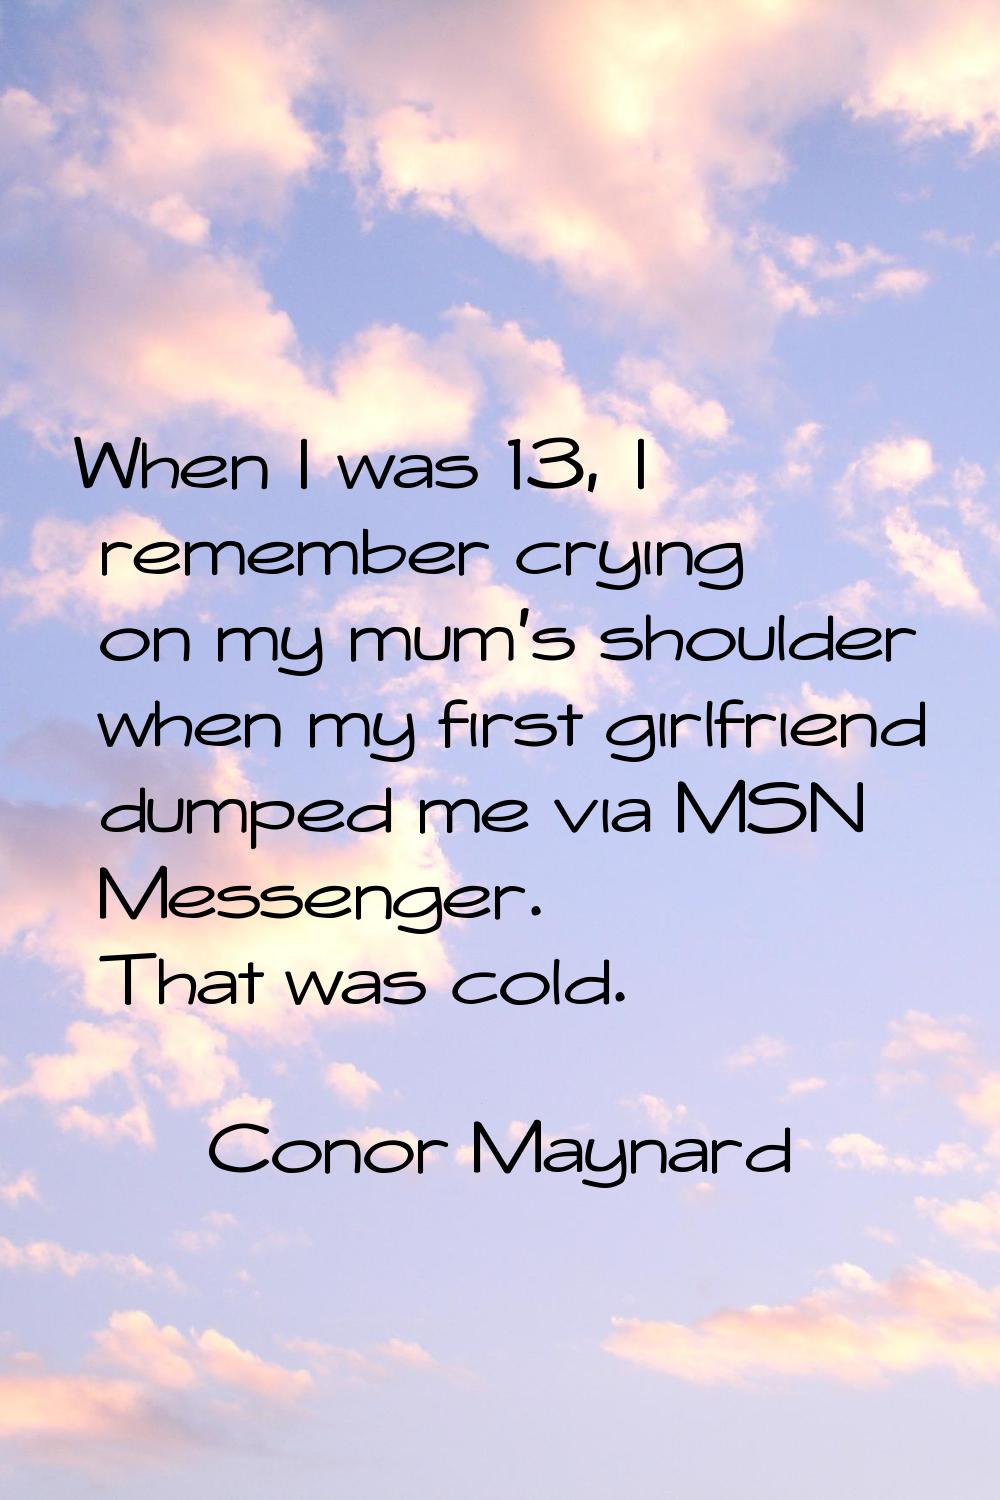 When I was 13, I remember crying on my mum's shoulder when my first girlfriend dumped me via MSN Me